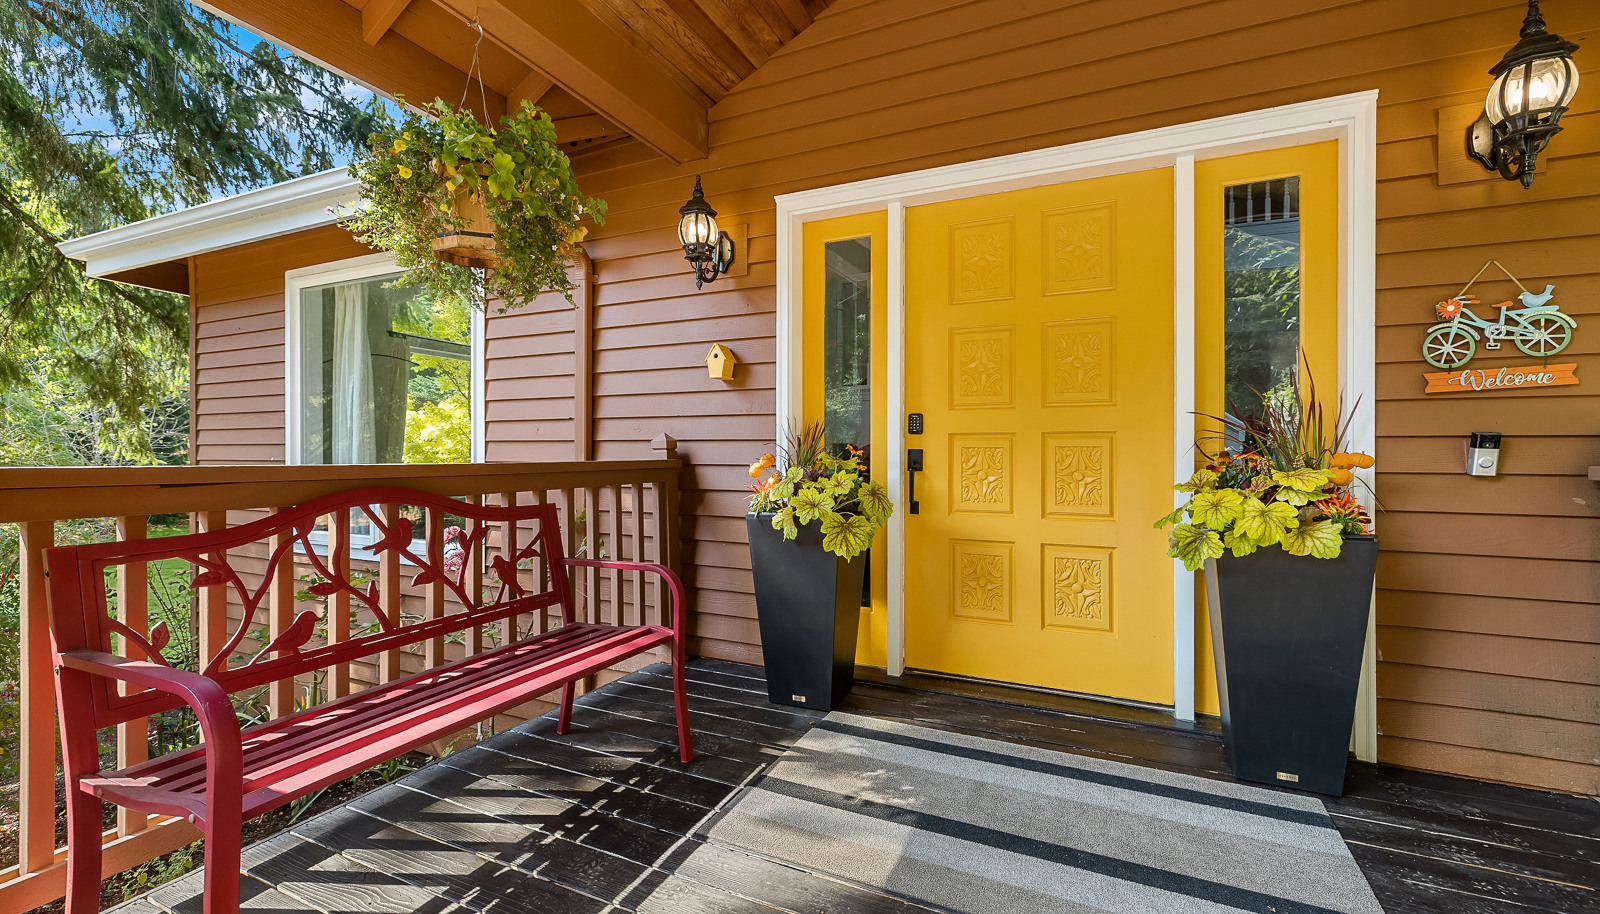 Large, covered front porch with sunny front door invites you in.